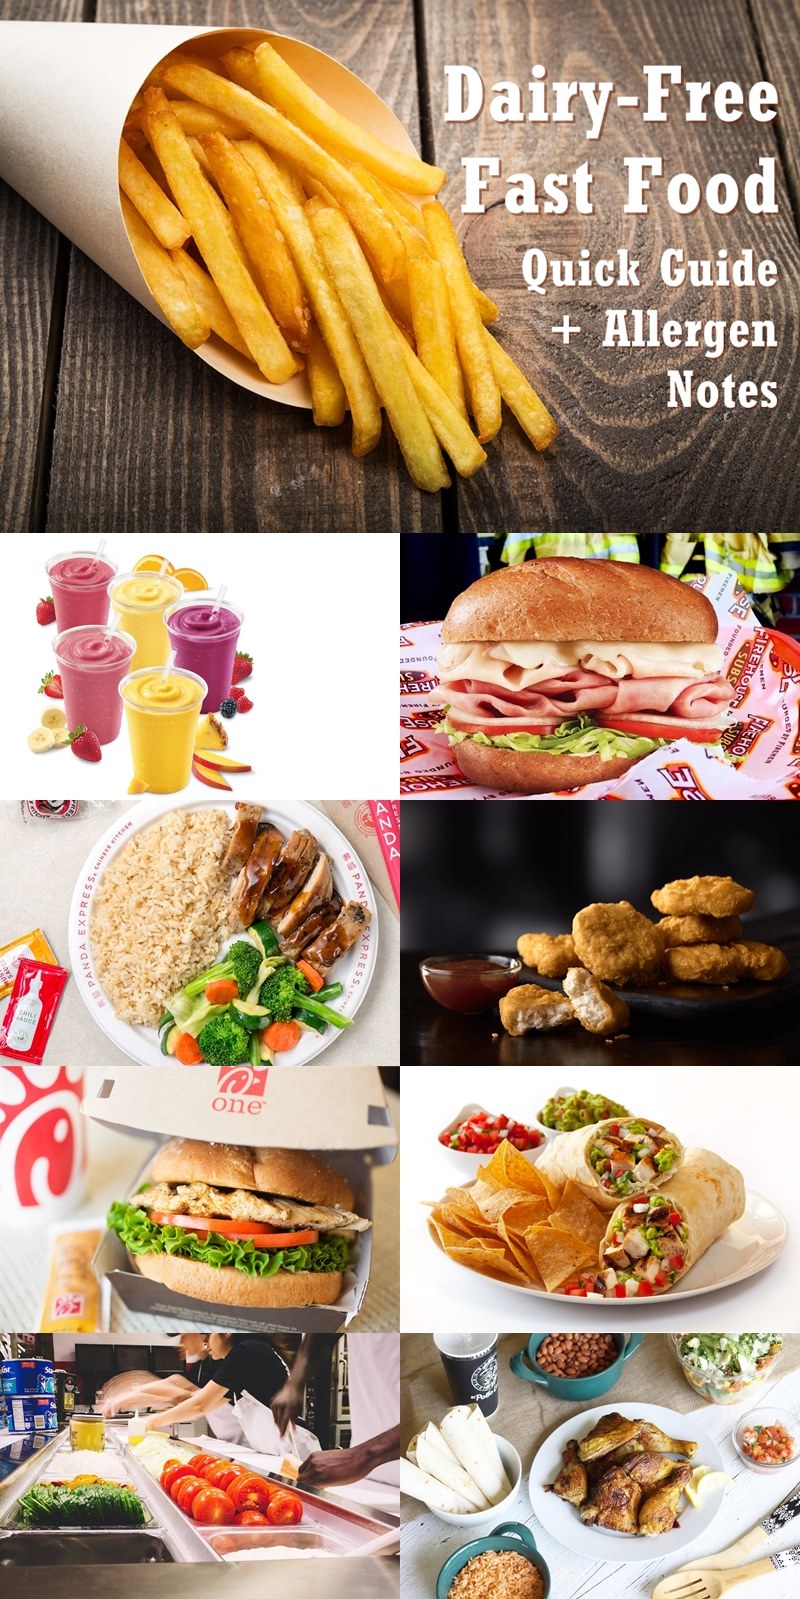 Dairy-Free Fast Food Listings - Quick Guide + Allergen Notes